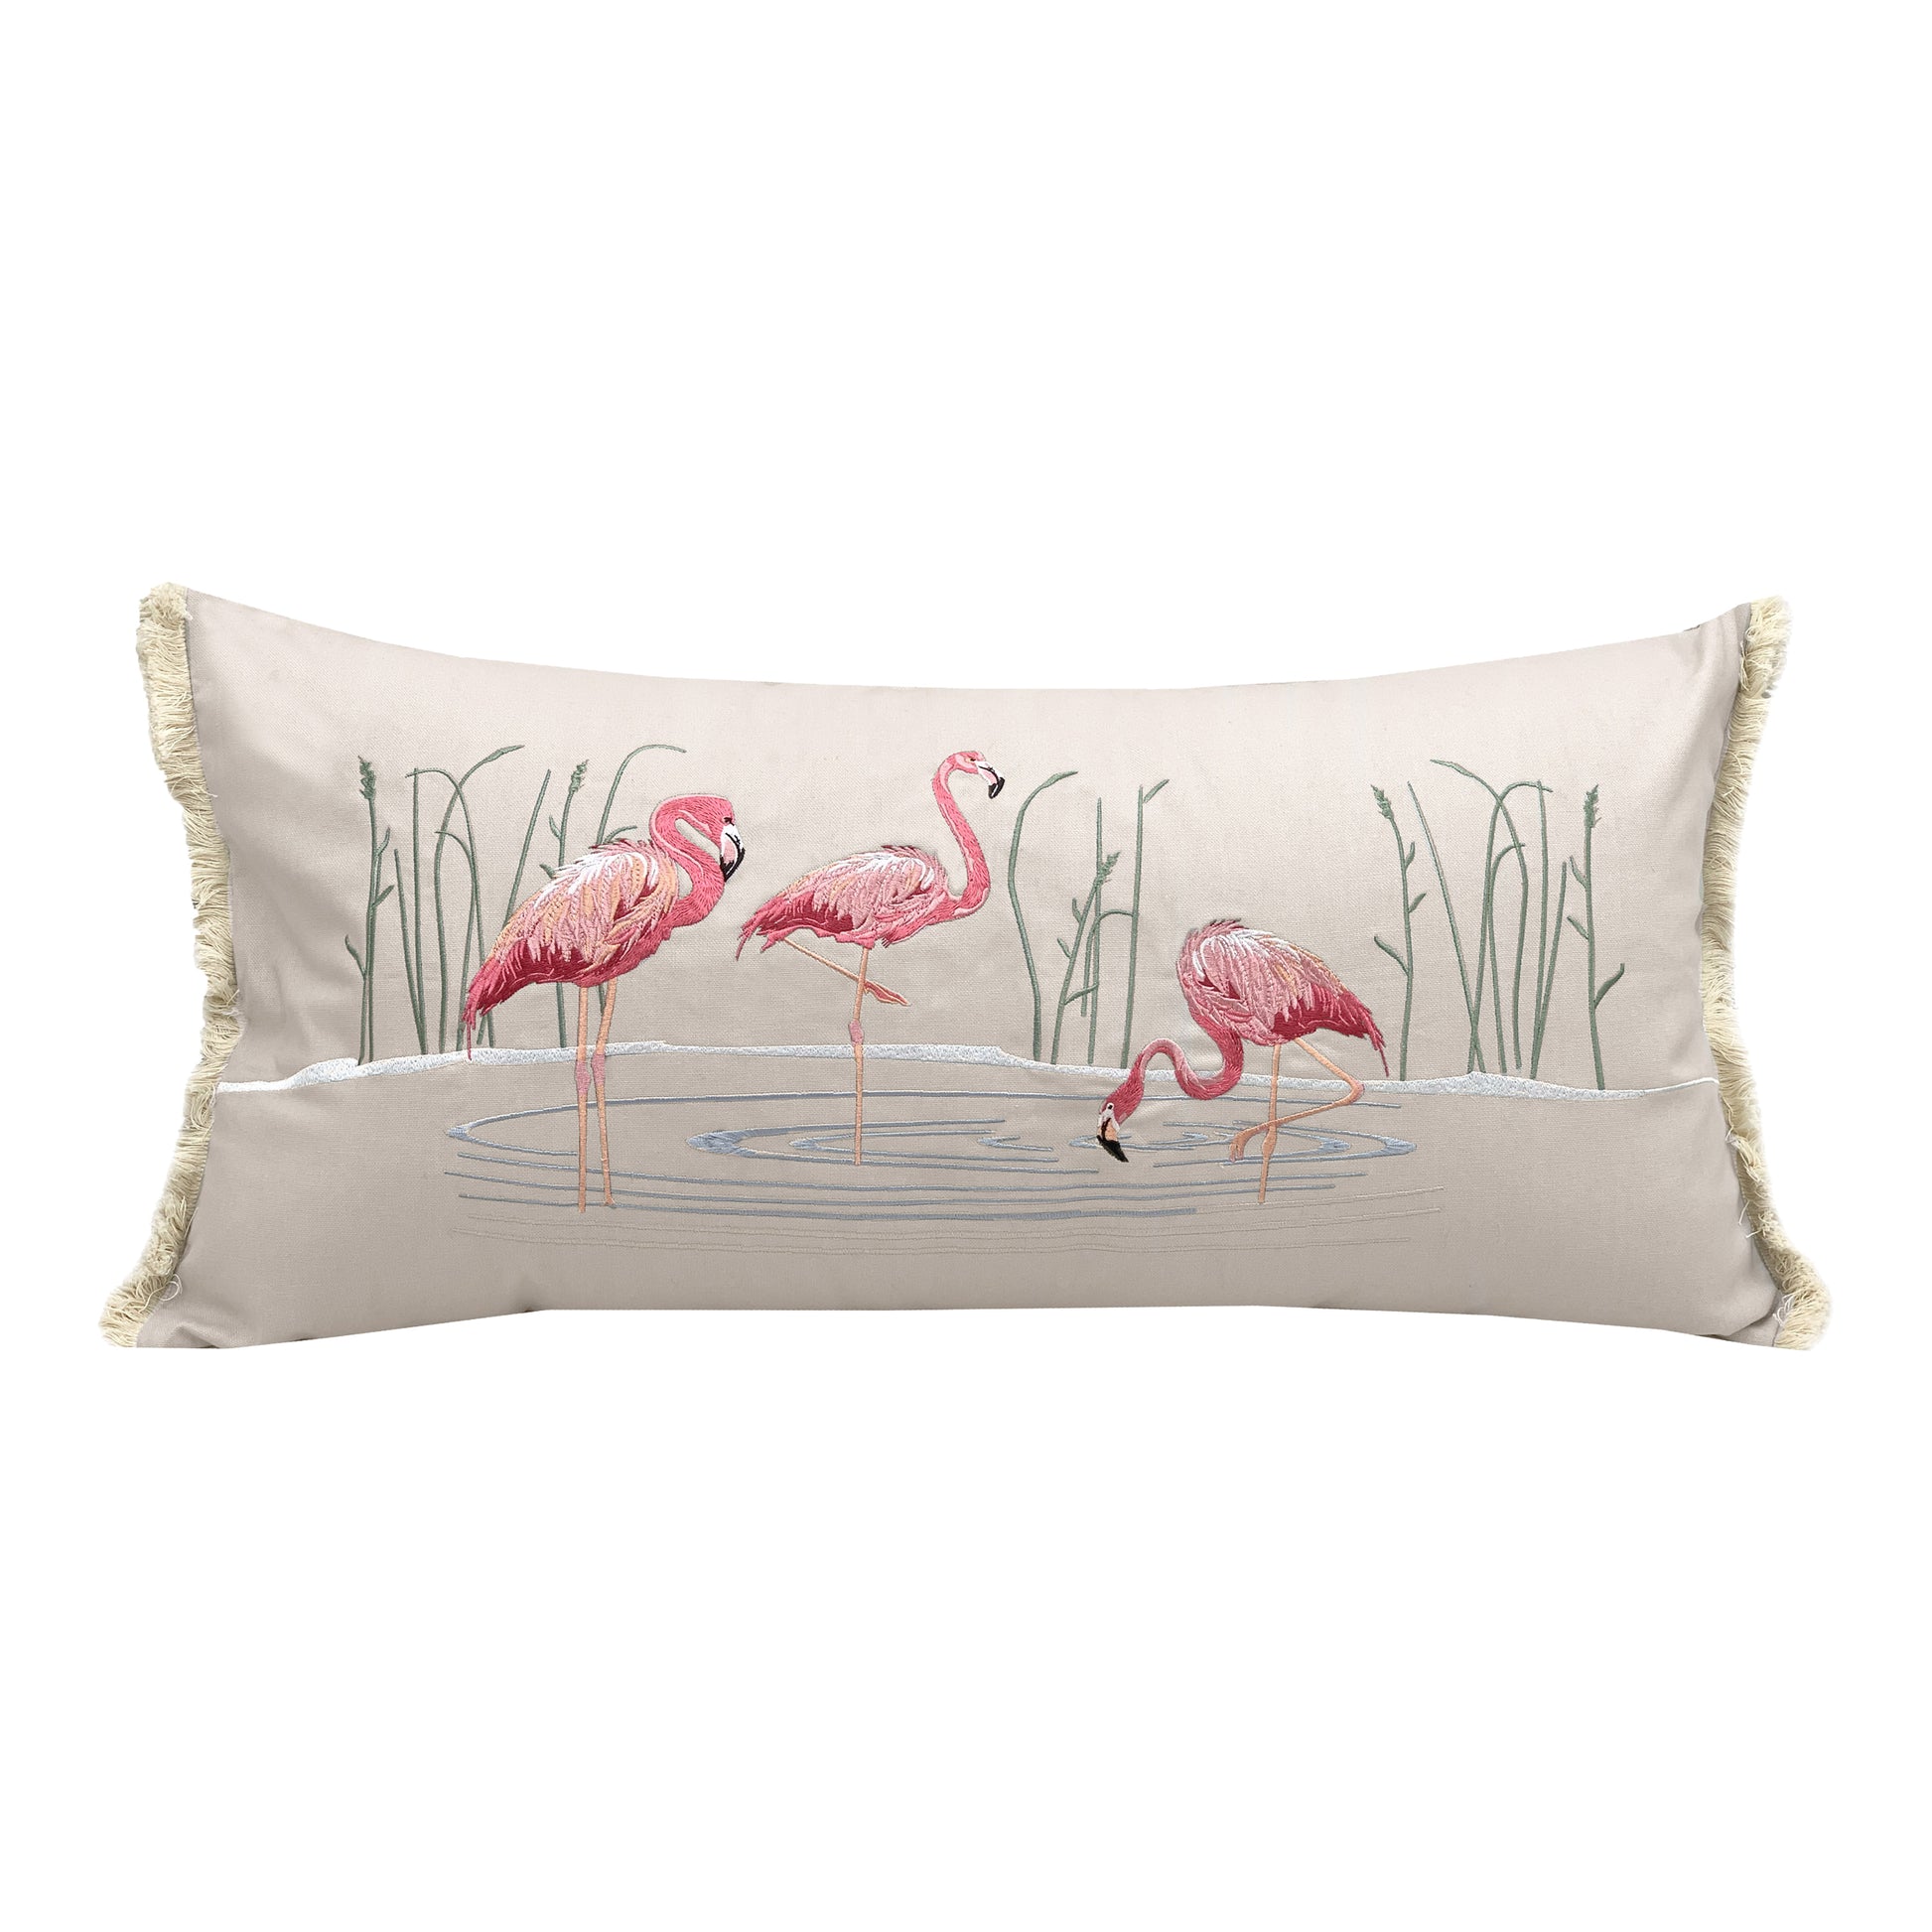 Three pink flamingos standing in a pool of water. Pillow is finished with fringed edges.